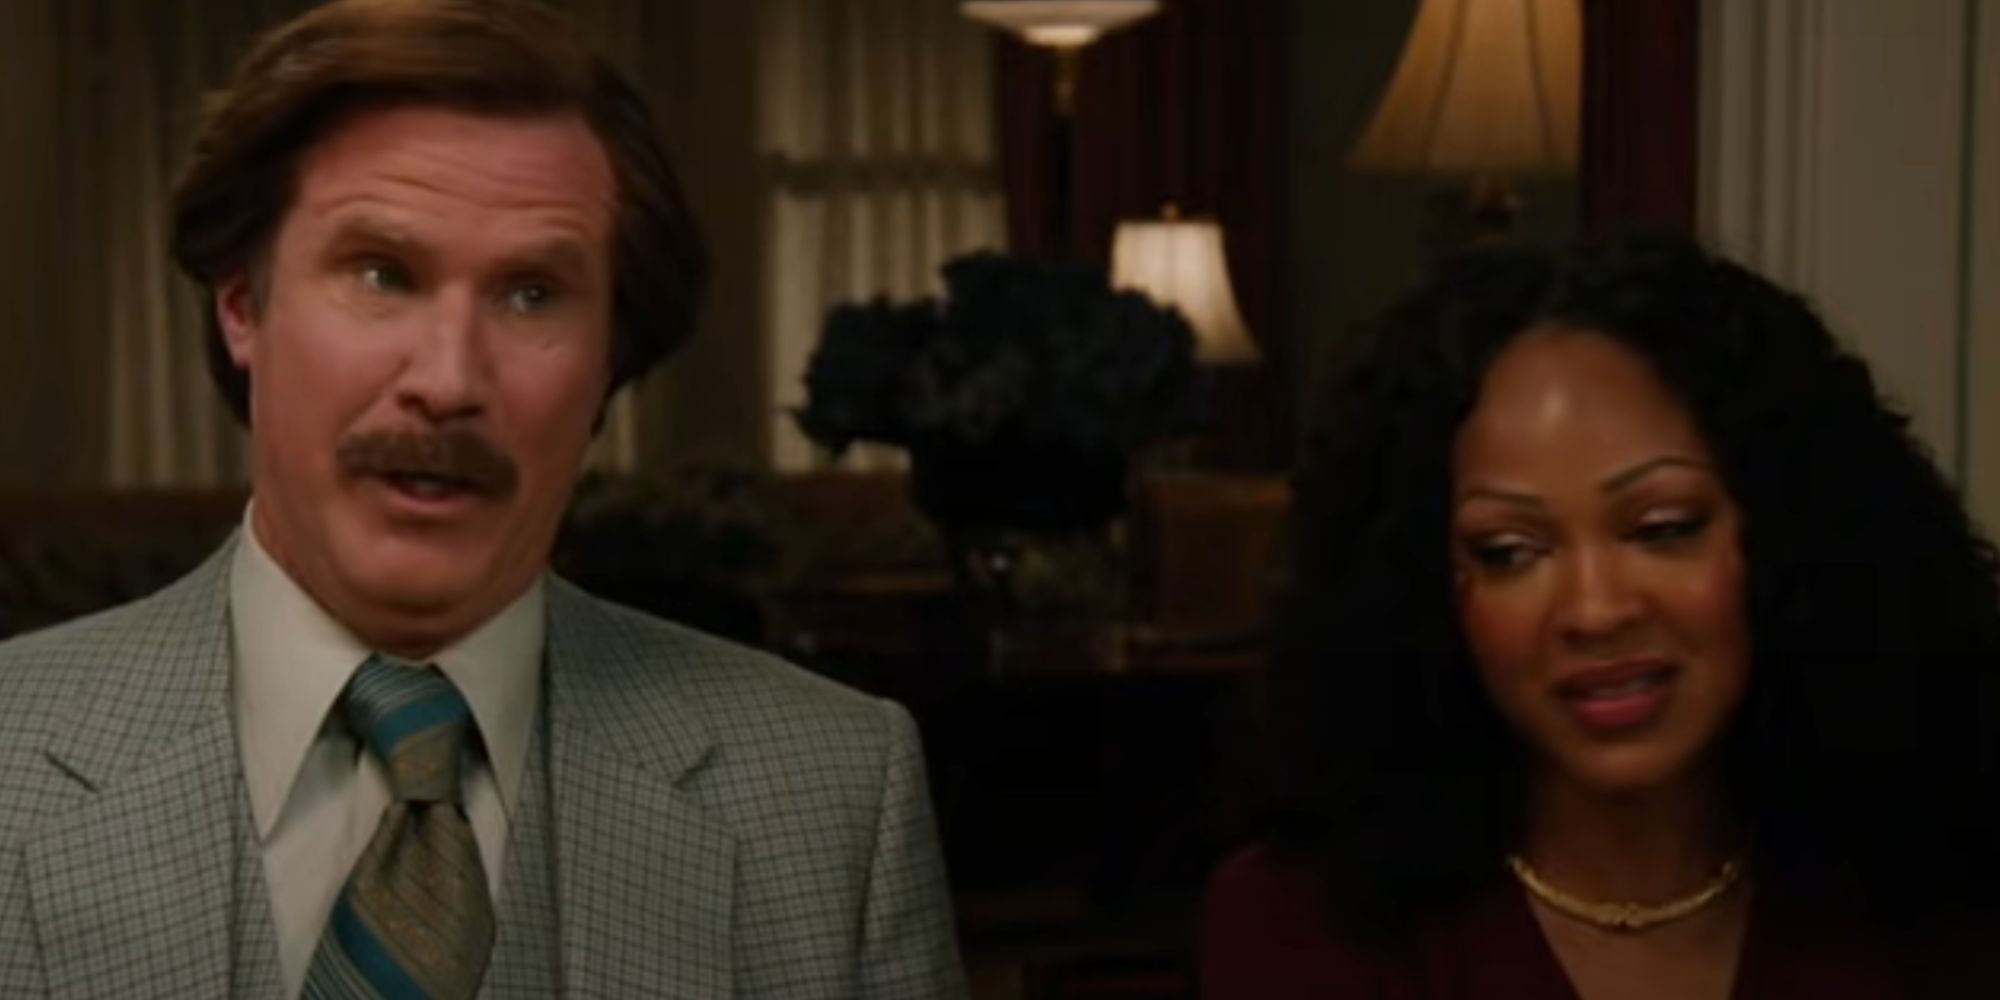 Will Ferrell mid-sentence as Ron Burgundy in Anchorman 2 while Meagan Good looks embarrassed as Linda Jackson 